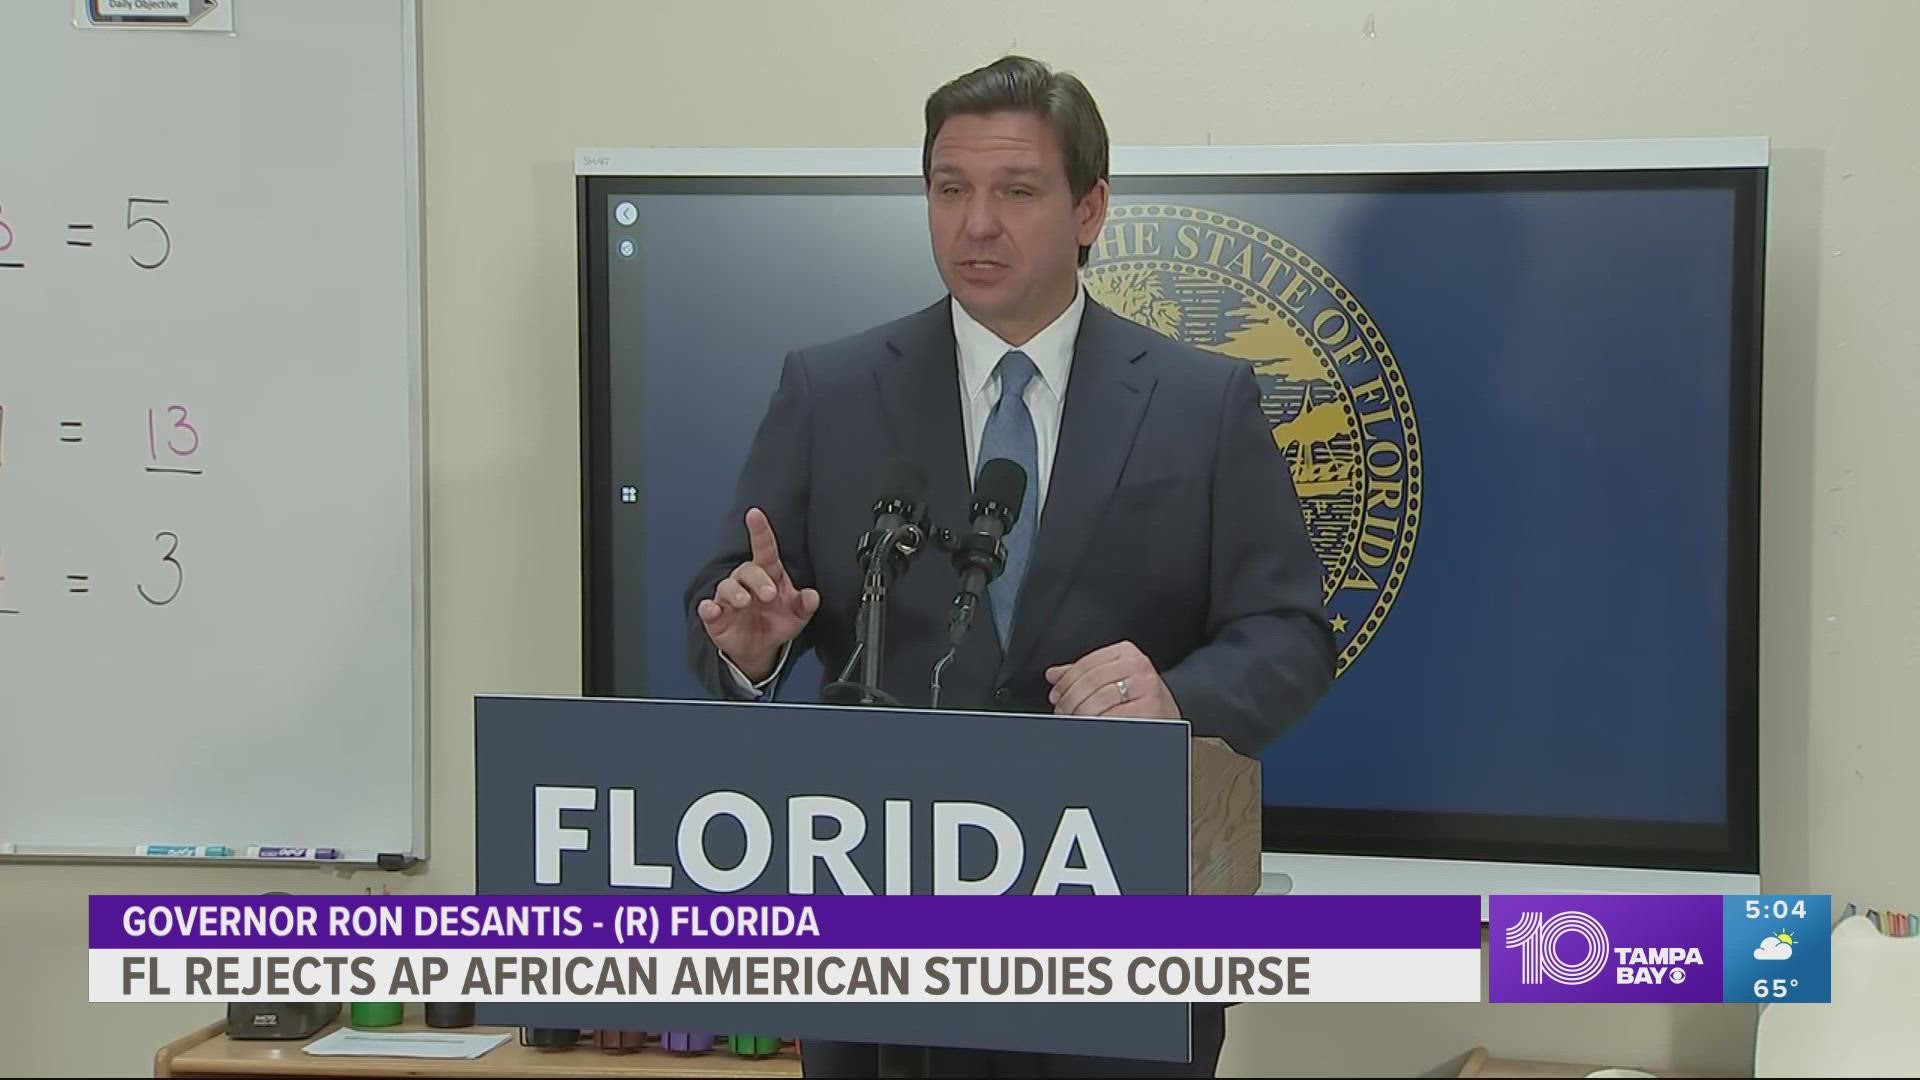 "We want education, not indoctrination," DeSantis said Monday at a Jacksonville school. He said the AP class is using Black history to "shoehorn in queer theory."